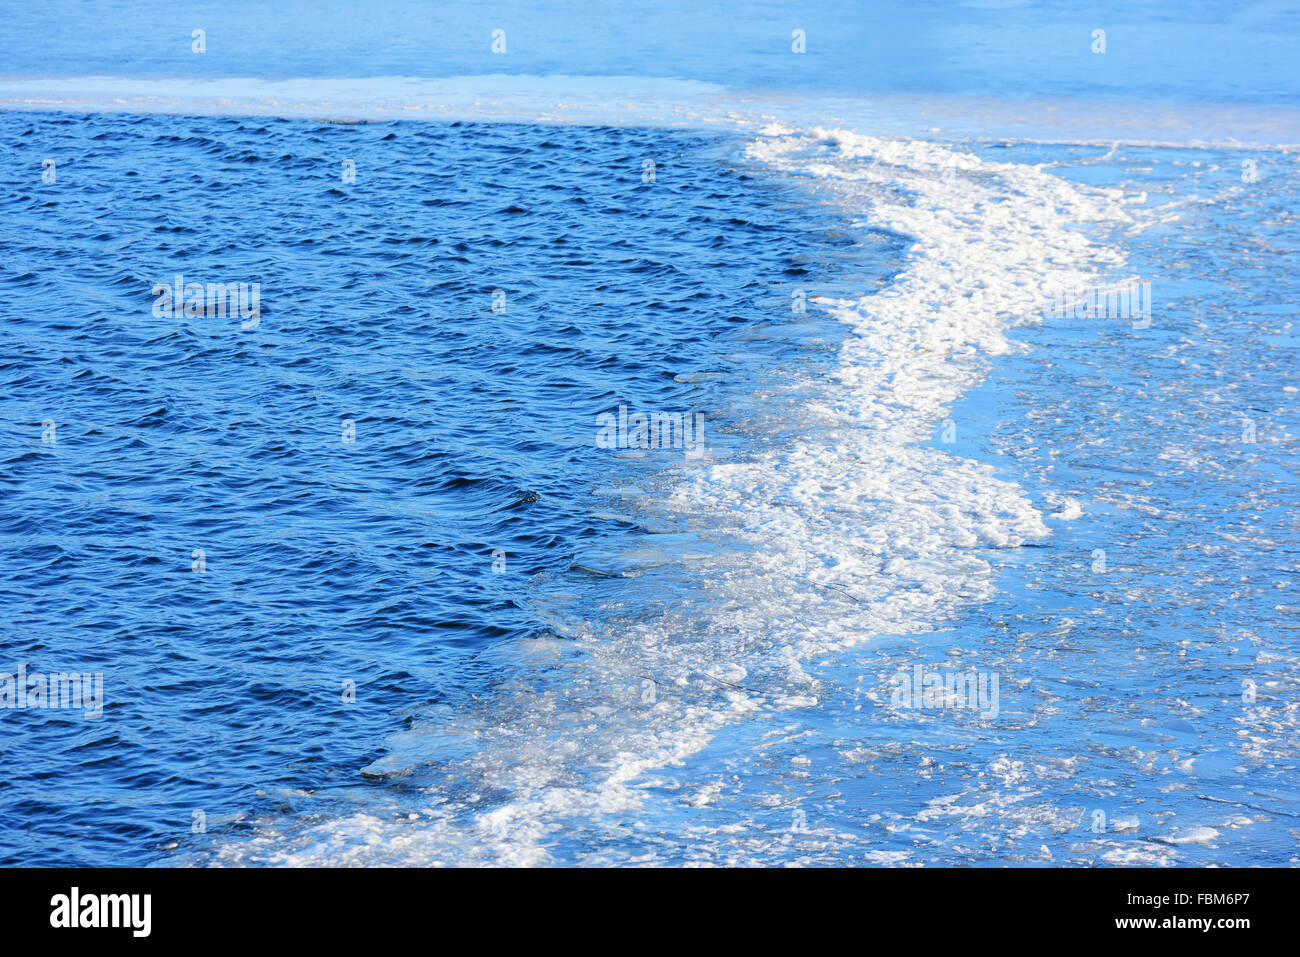 A boundary between calm sea water and ice form a small area of broken ice that almost look like foam. Stock Photo